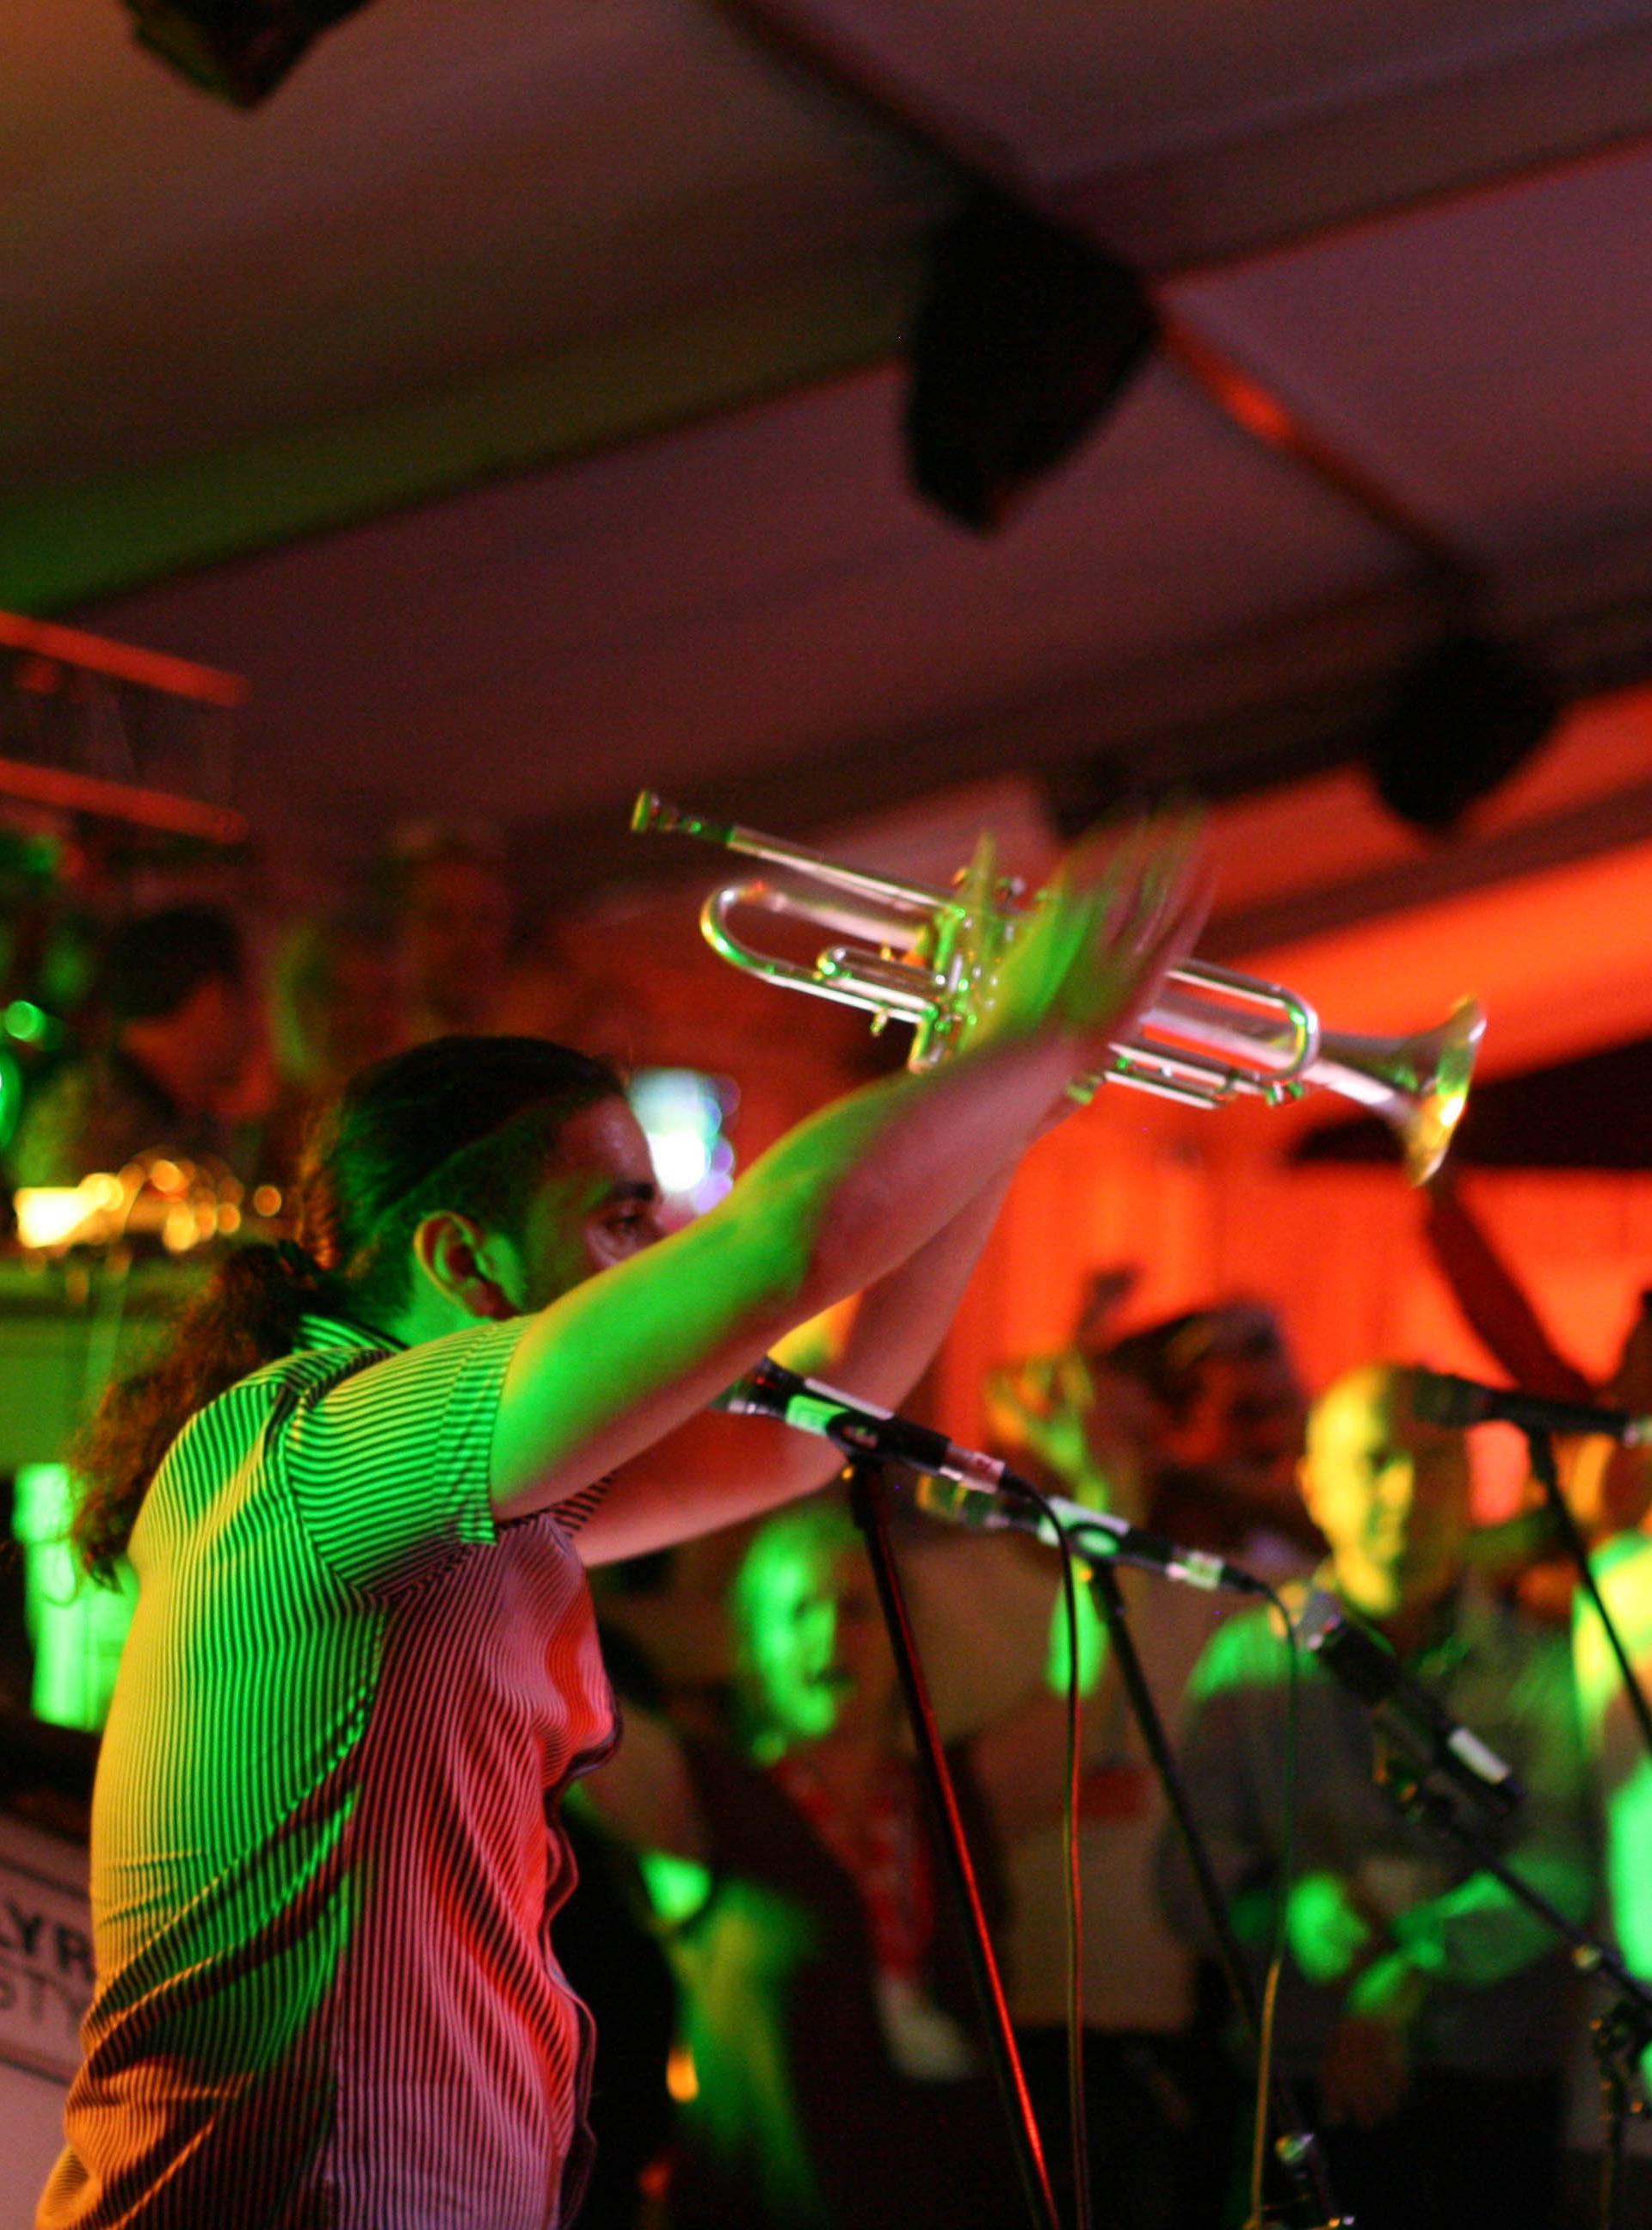 Slavic brass band creating a party in Hungary